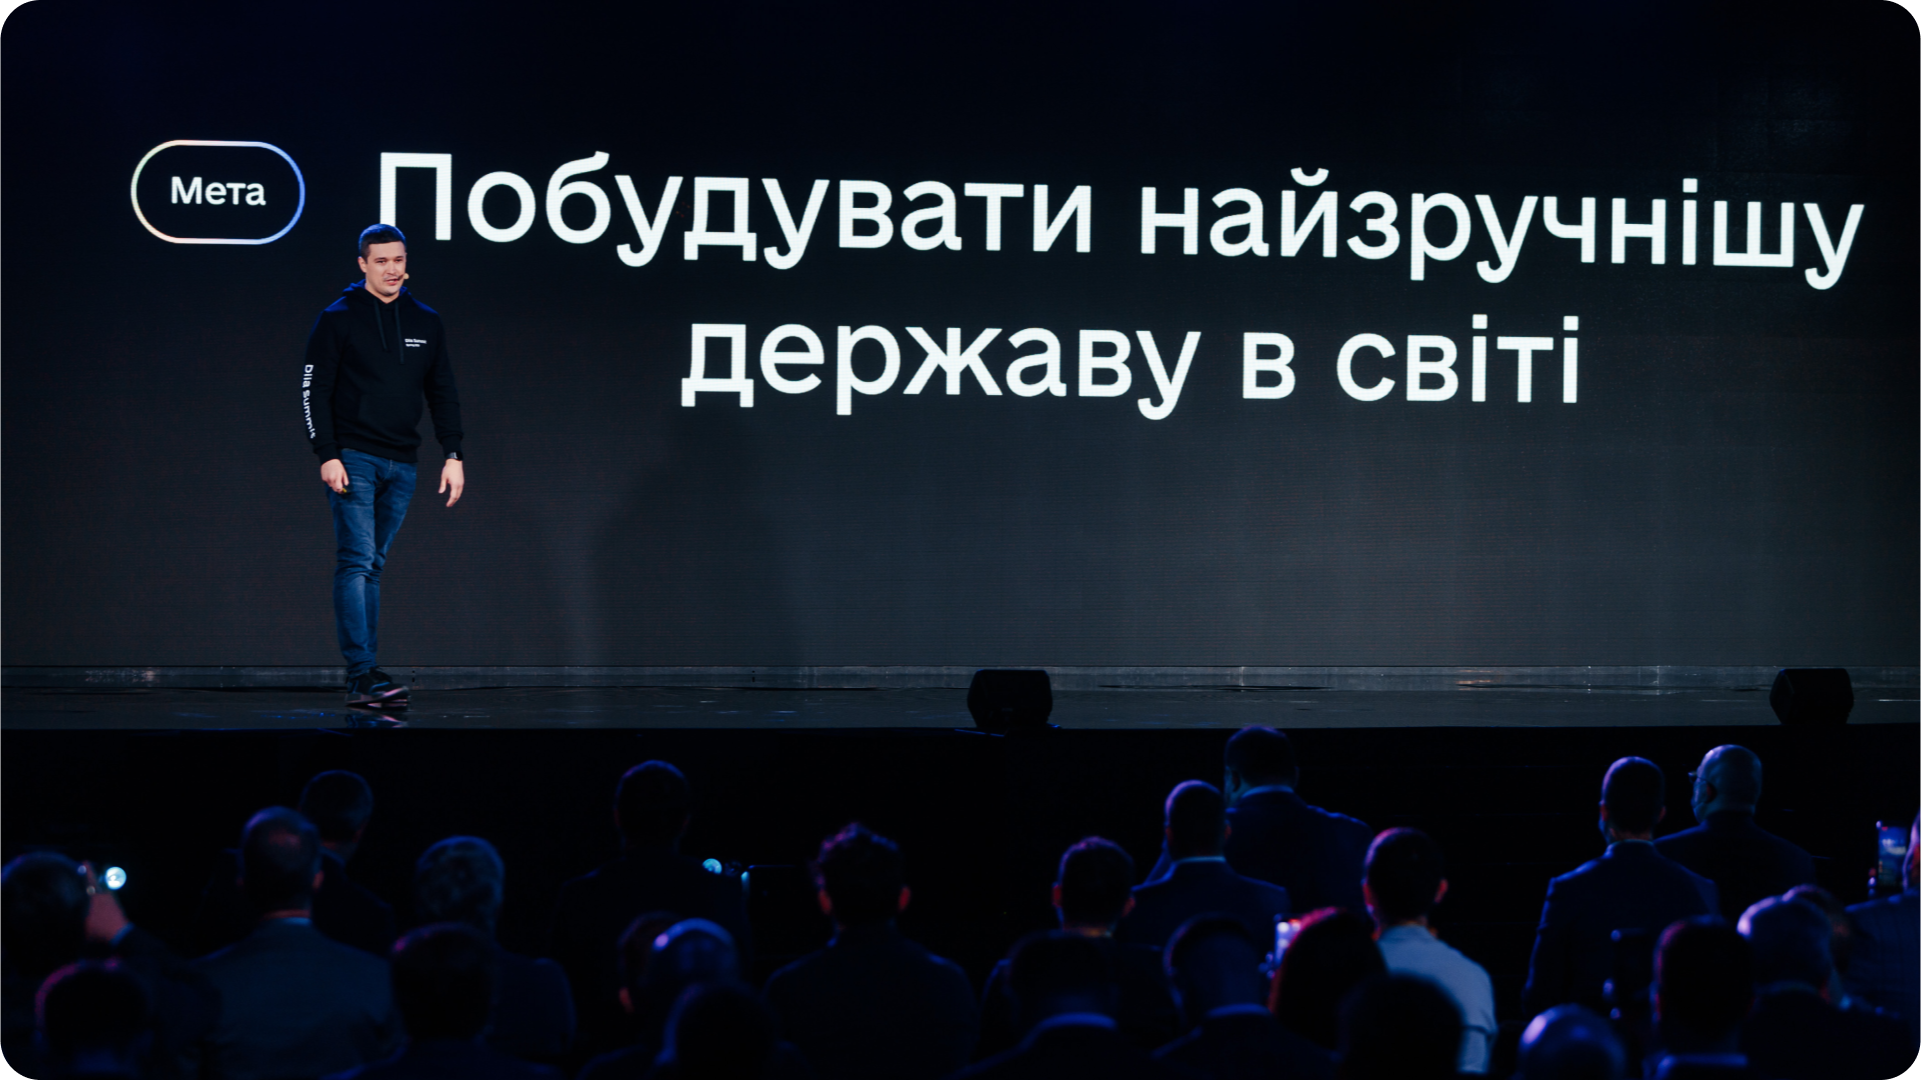 Mykhailo Fedorov presents the goal of the Ministry of Digital Transformation